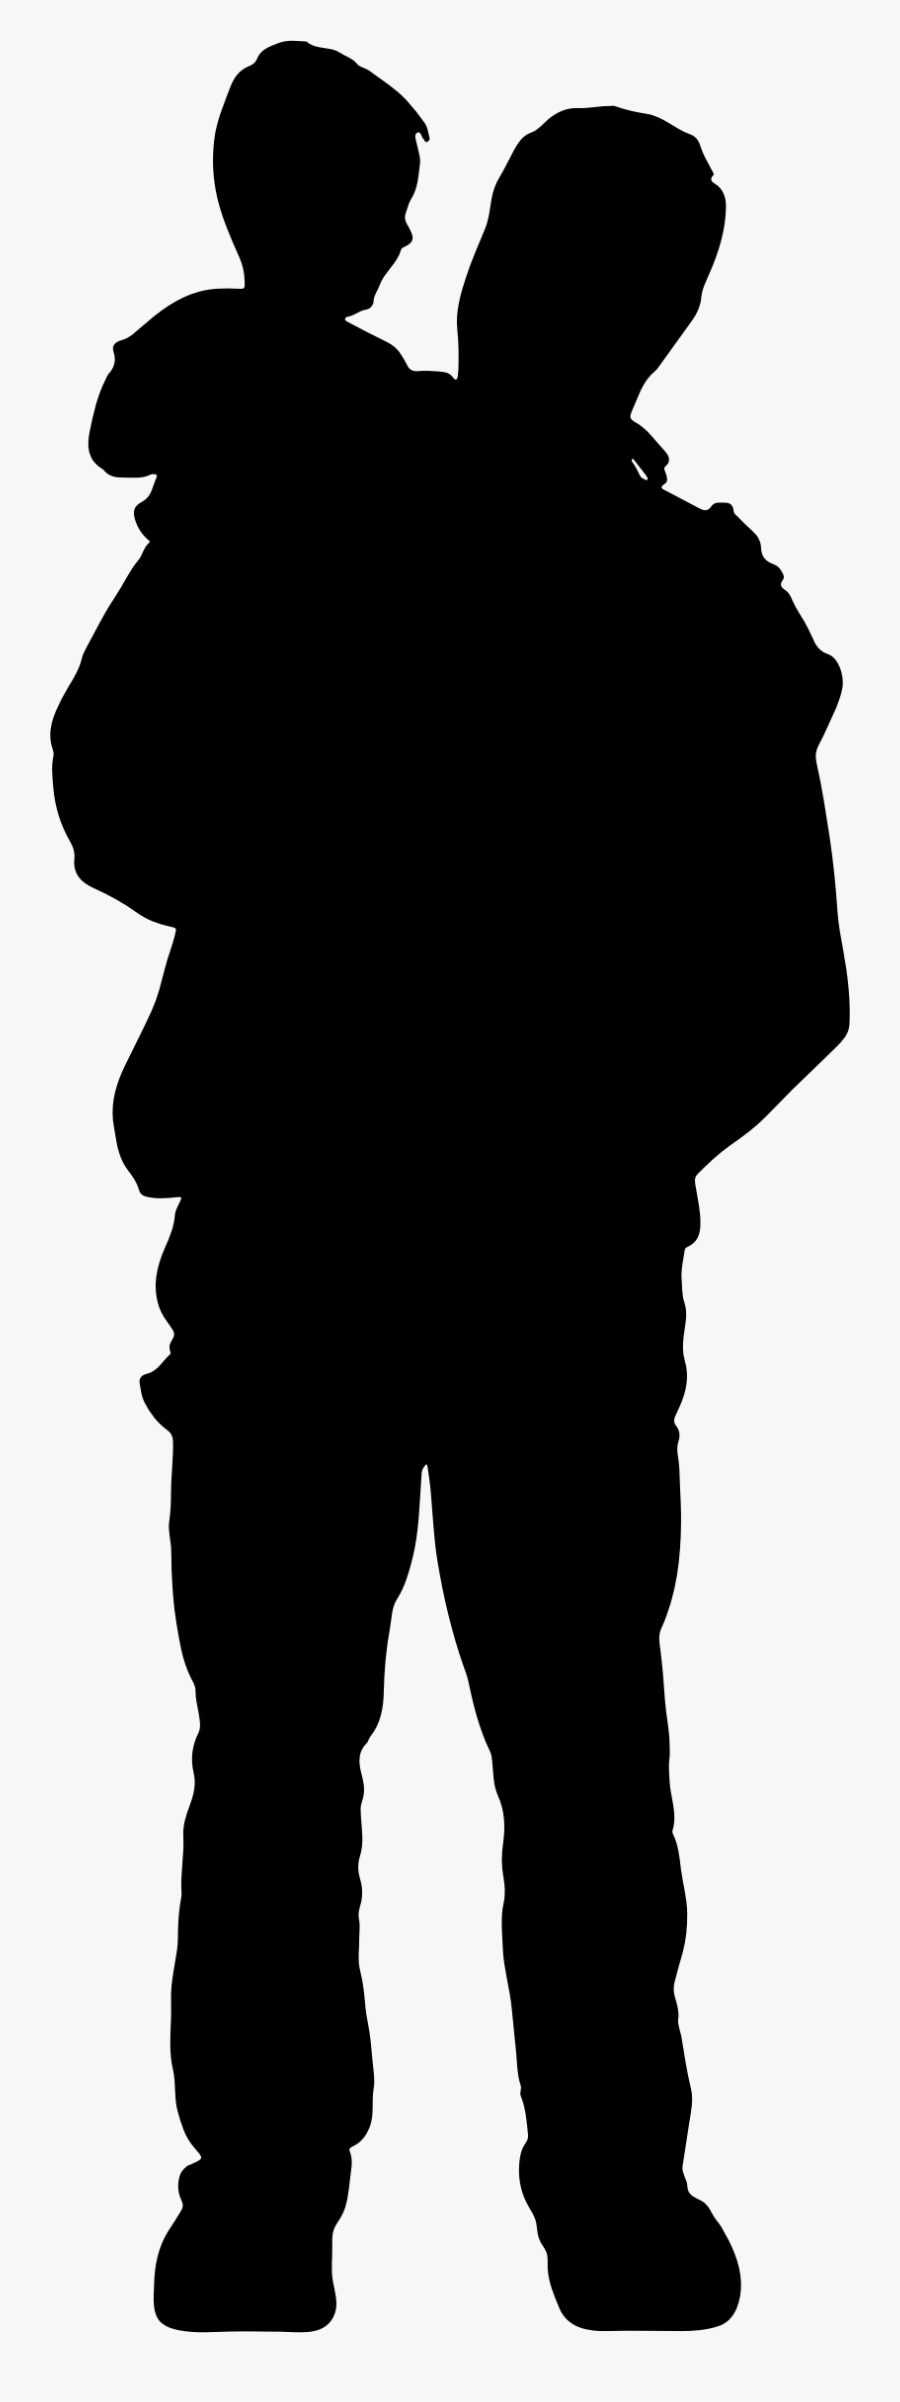 Clipart - Father Holding Son Silhouette, Transparent Clipart